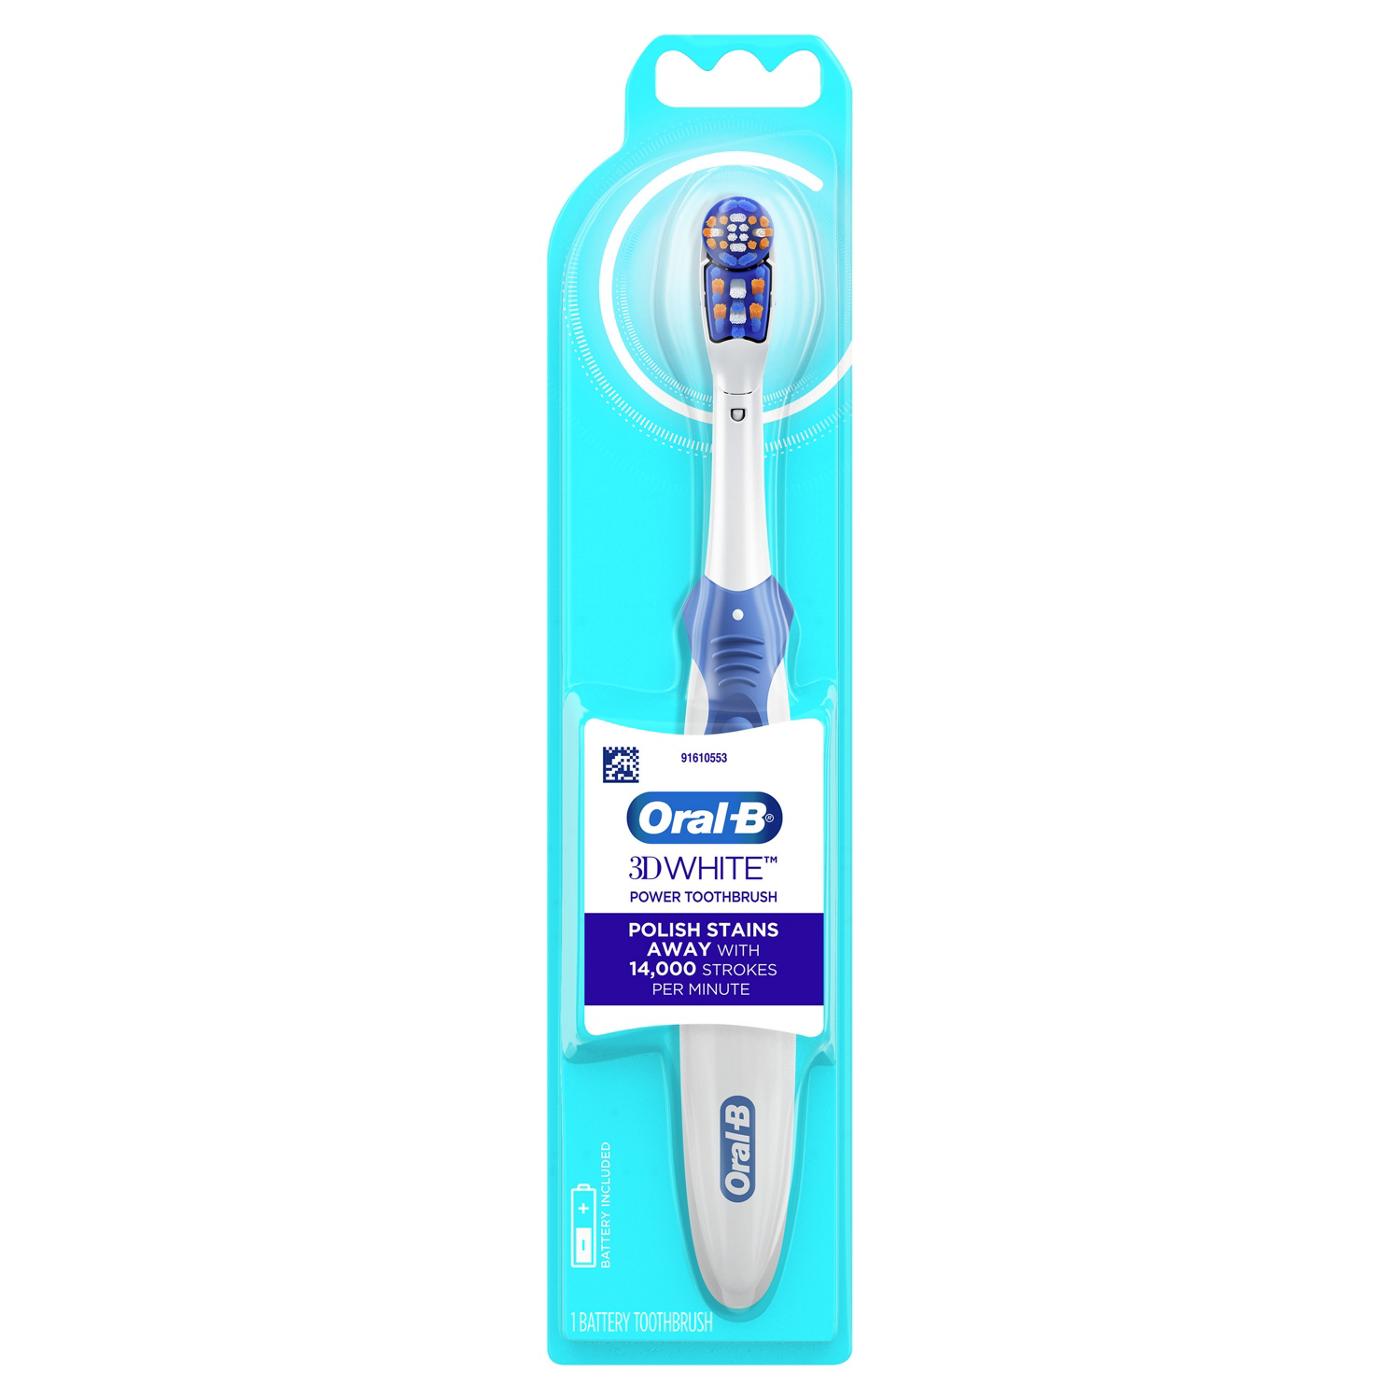 Oral-B 3D White Battery Powered Toothbrush; image 1 of 3